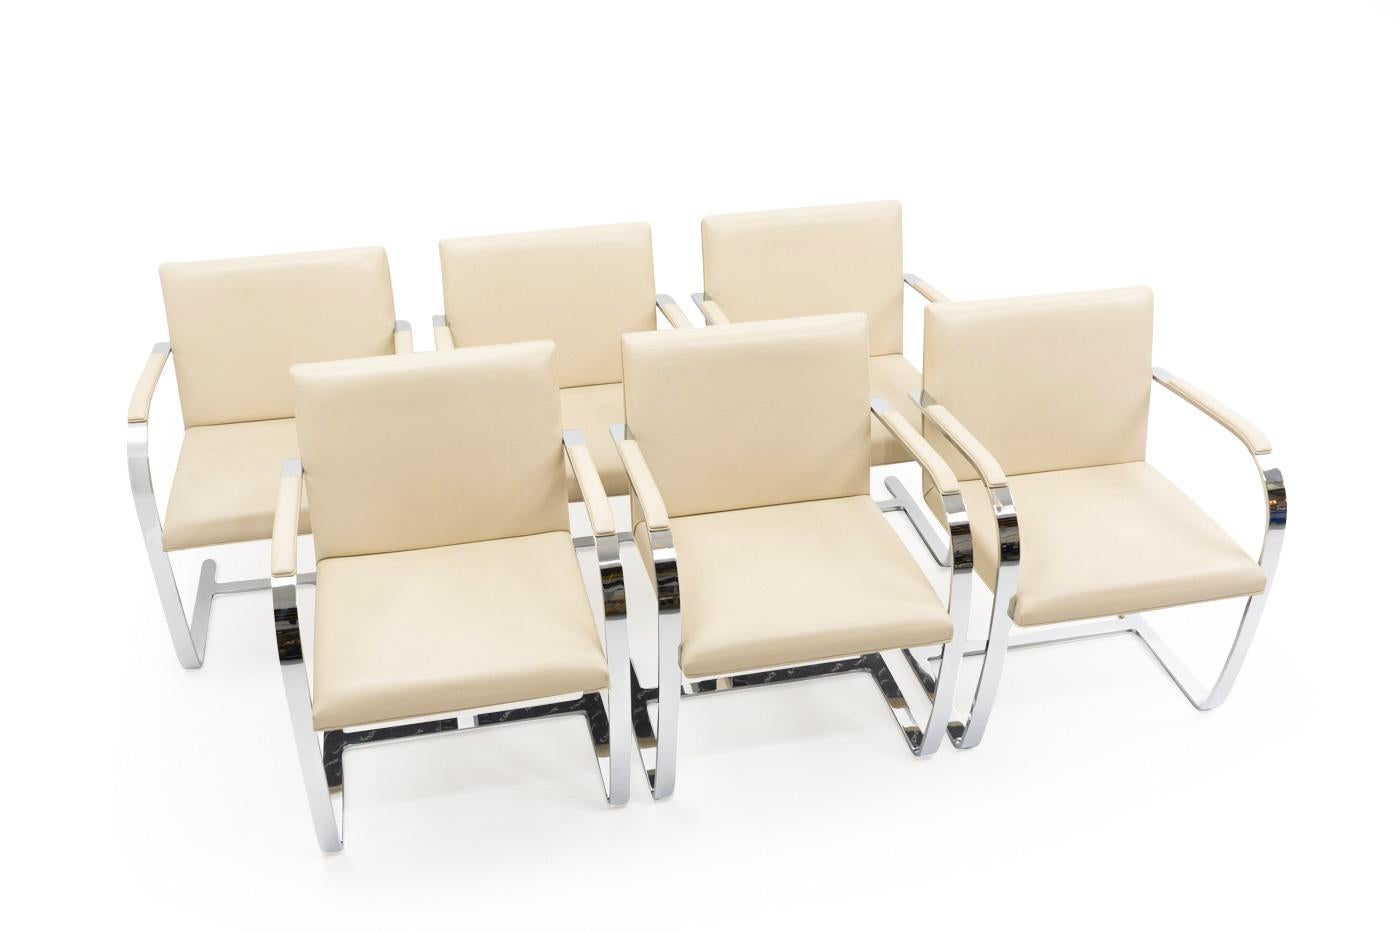 Set of of six BRNO Chairs by Ludwig Mies van der Rohe, produced by Knoll during the 1990s.

These cantilever chairs were originally designed during the 1930s for use in the dining room of the Tugendhat villa, located in BRNO (Czech republic). They